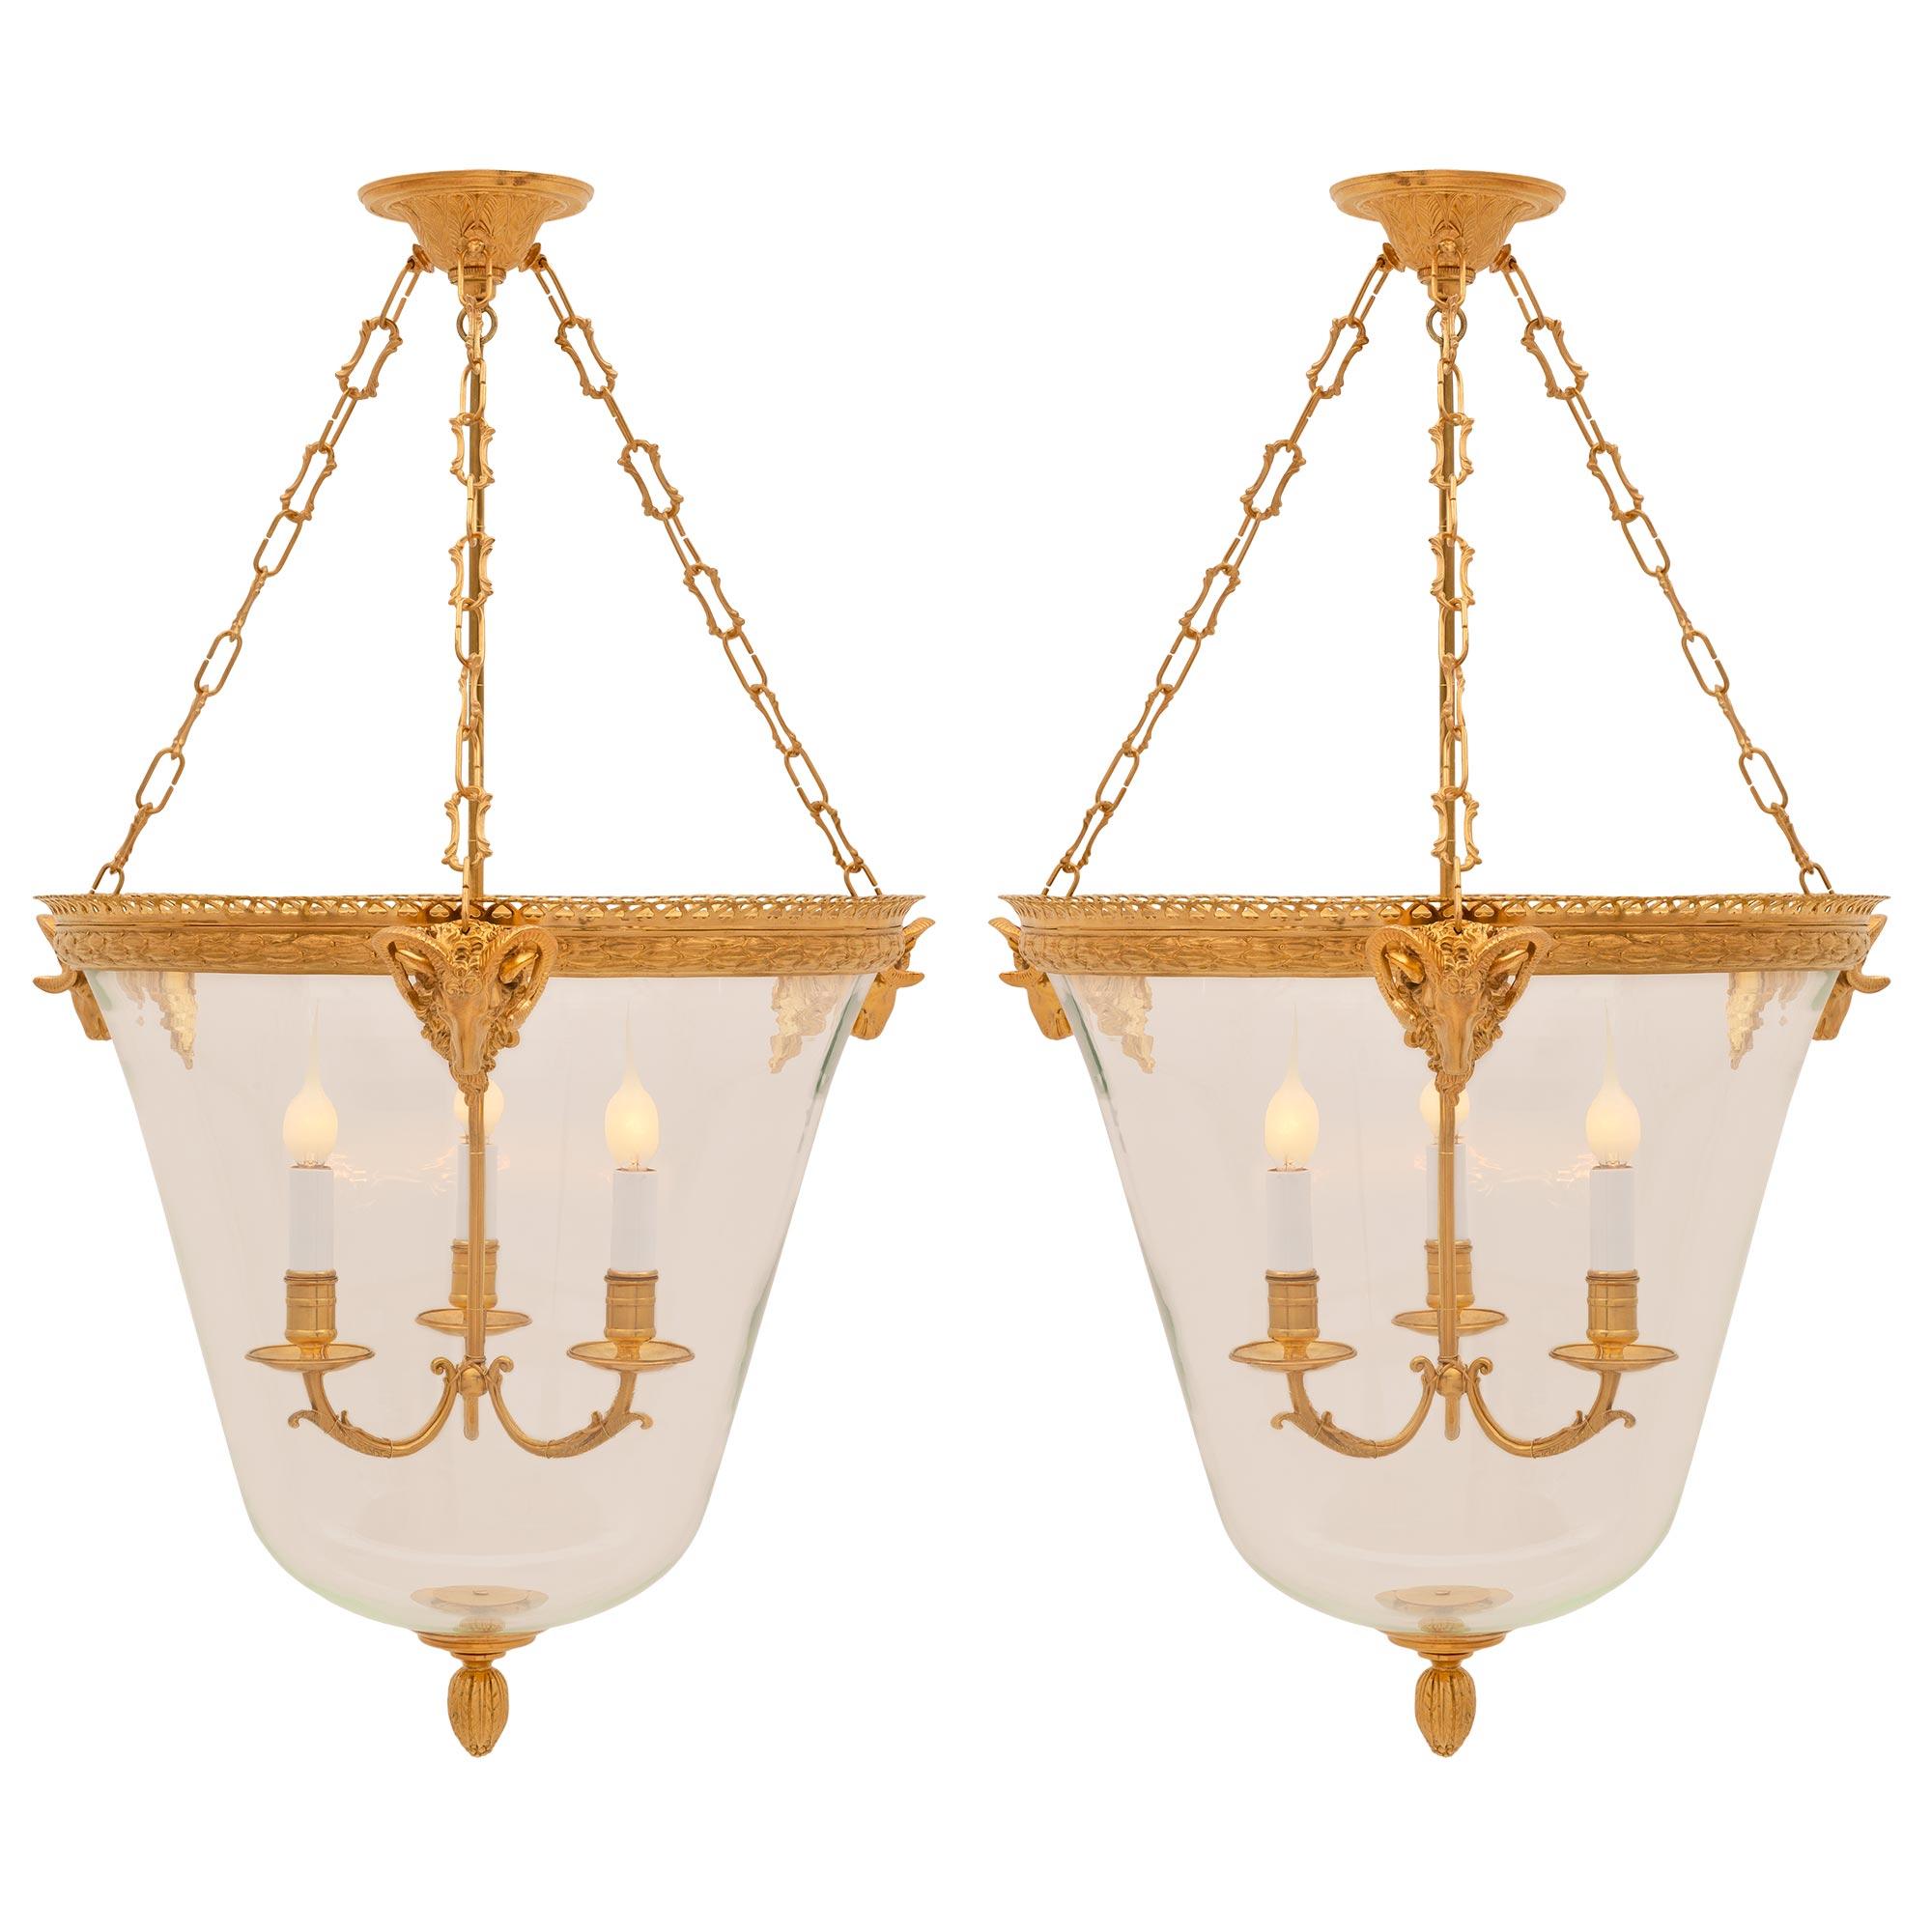 Pair Of French 19th Century Belle Époque Period Ormolu And Glass Lanterns For Sale